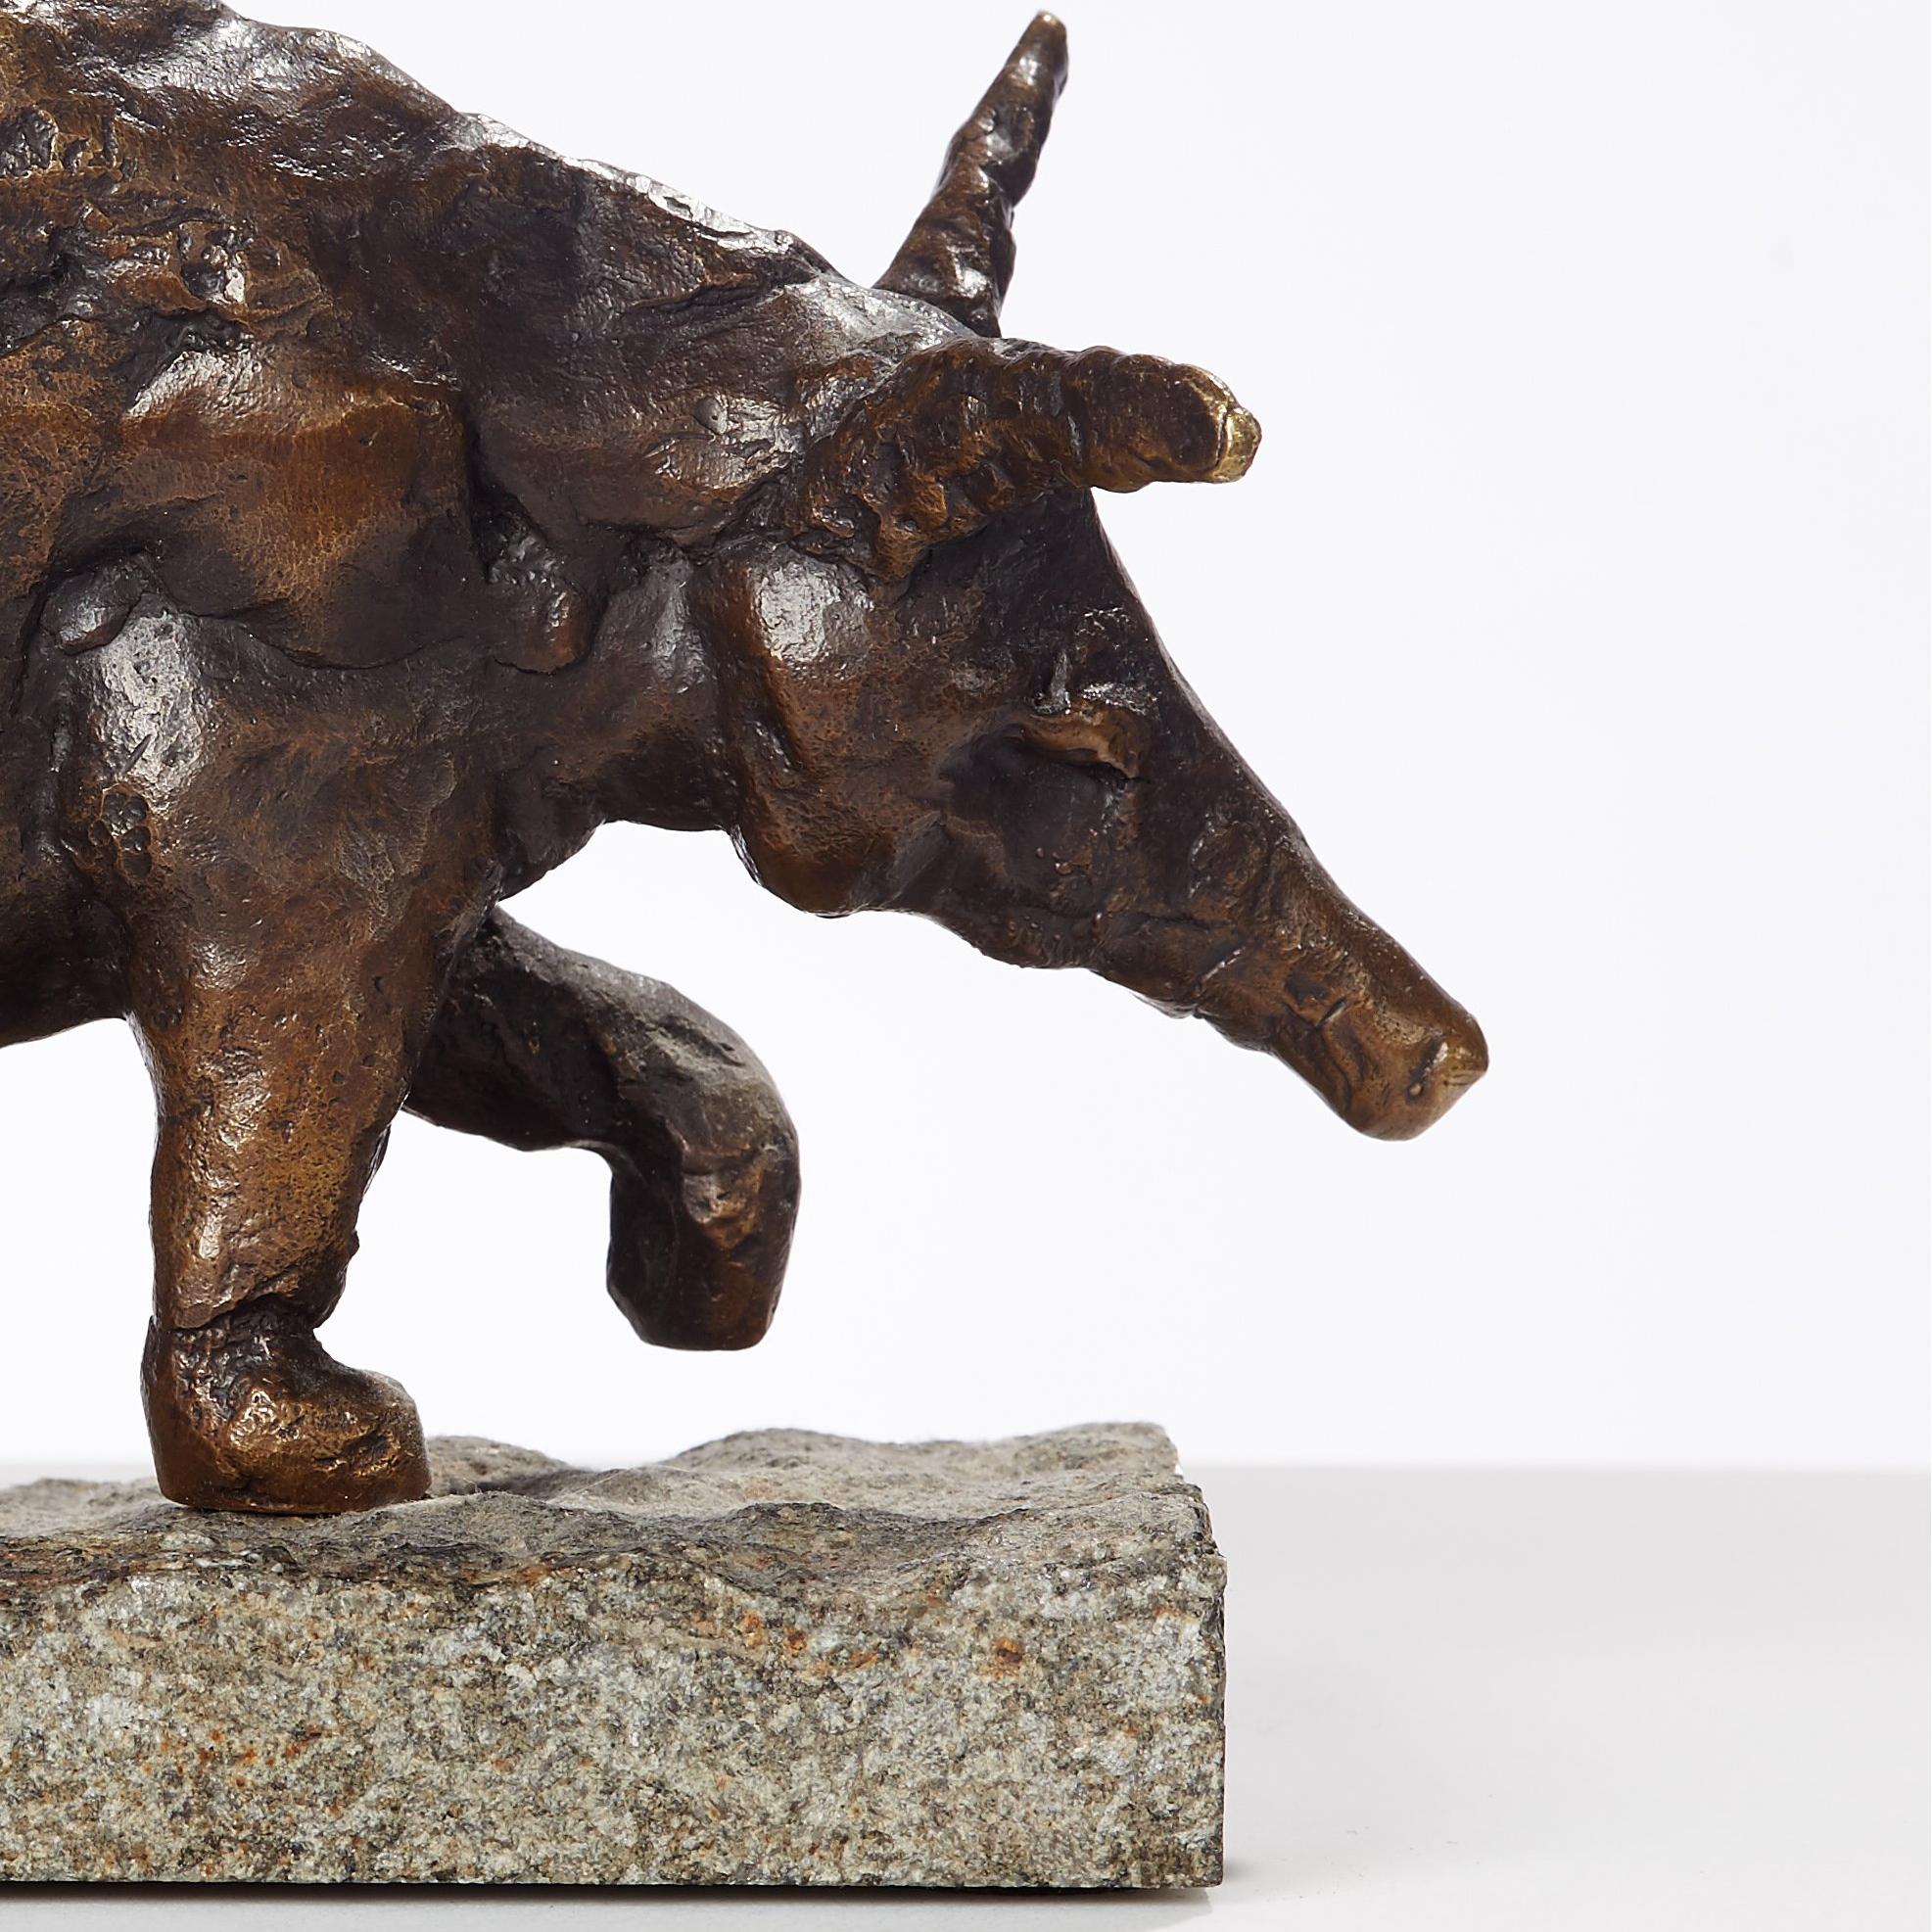 Signed bronze from small edition of 8. plus 4 artists proofs

Dominik Albiński
(born 1975, South Africa)
He started carving at the age of twelve. When he was eighteen he went to Paris, where he studied at the prestigious Science Po. In 1997 he came